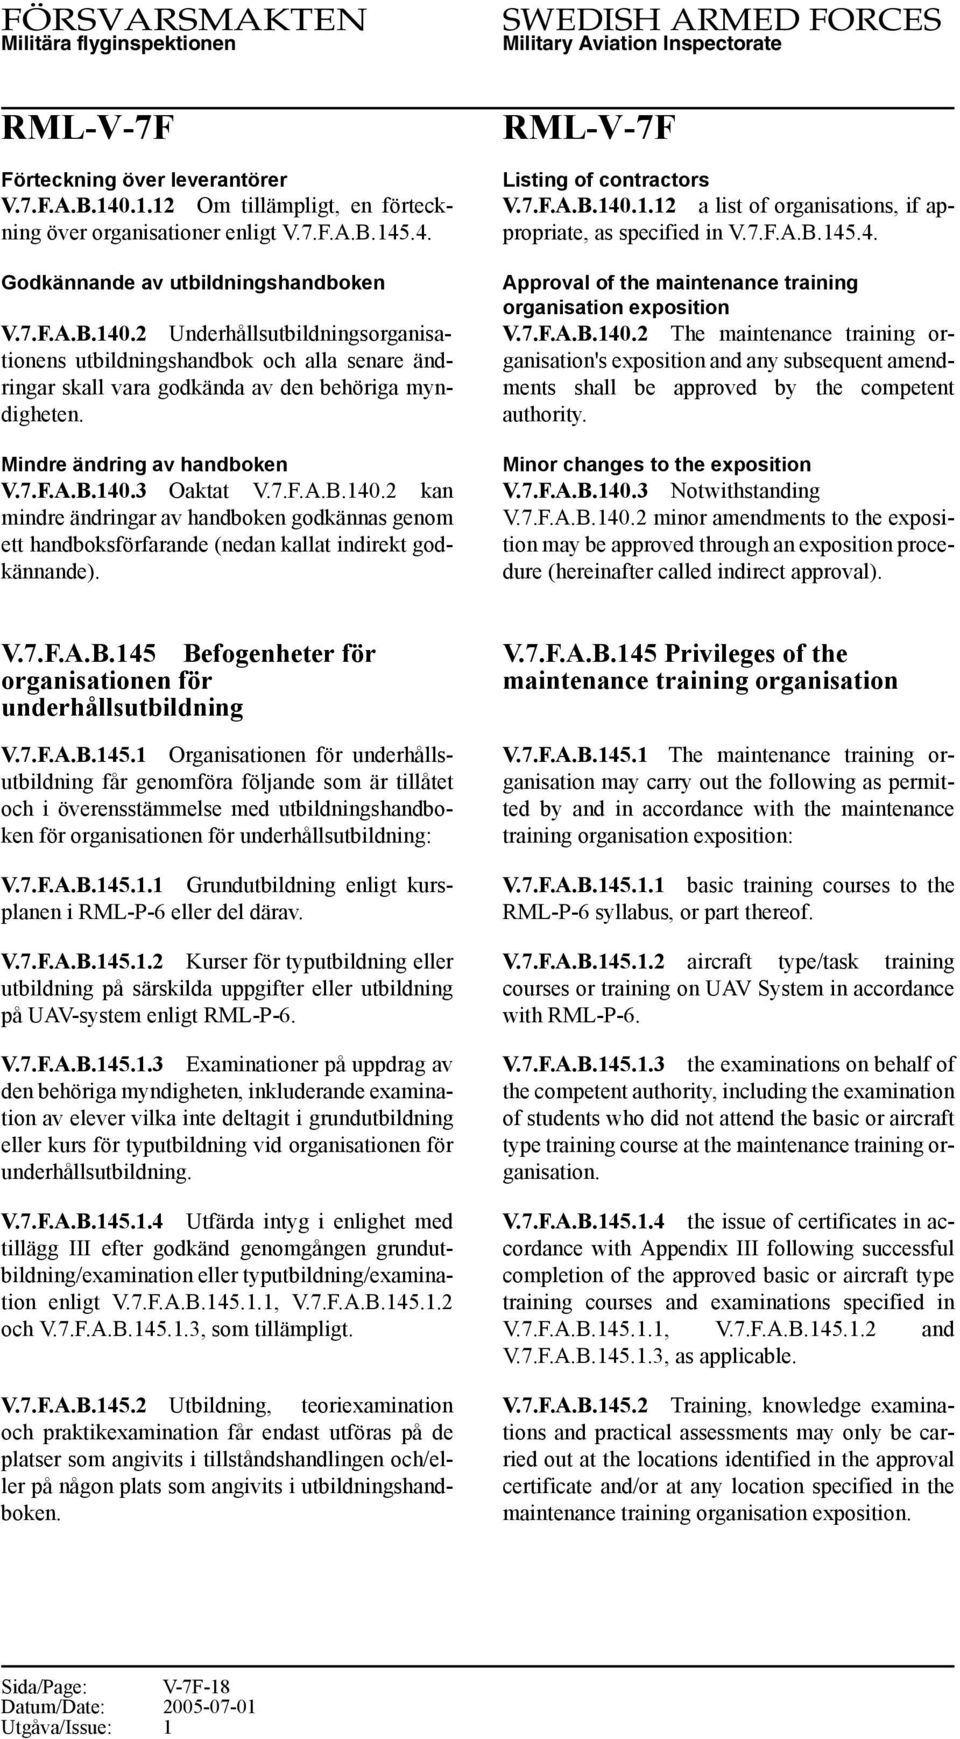 Listing of contractors V.7.F.A.B.140.1.12 a list of organisations, if appropriate, as specified in V.7.F.A.B.145.4. Approval of the maintenance training organisation exposition V.7.F.A.B.140.2 The maintenance training organisation's exposition and any subsequent amendments shall be approved by the competent authority.